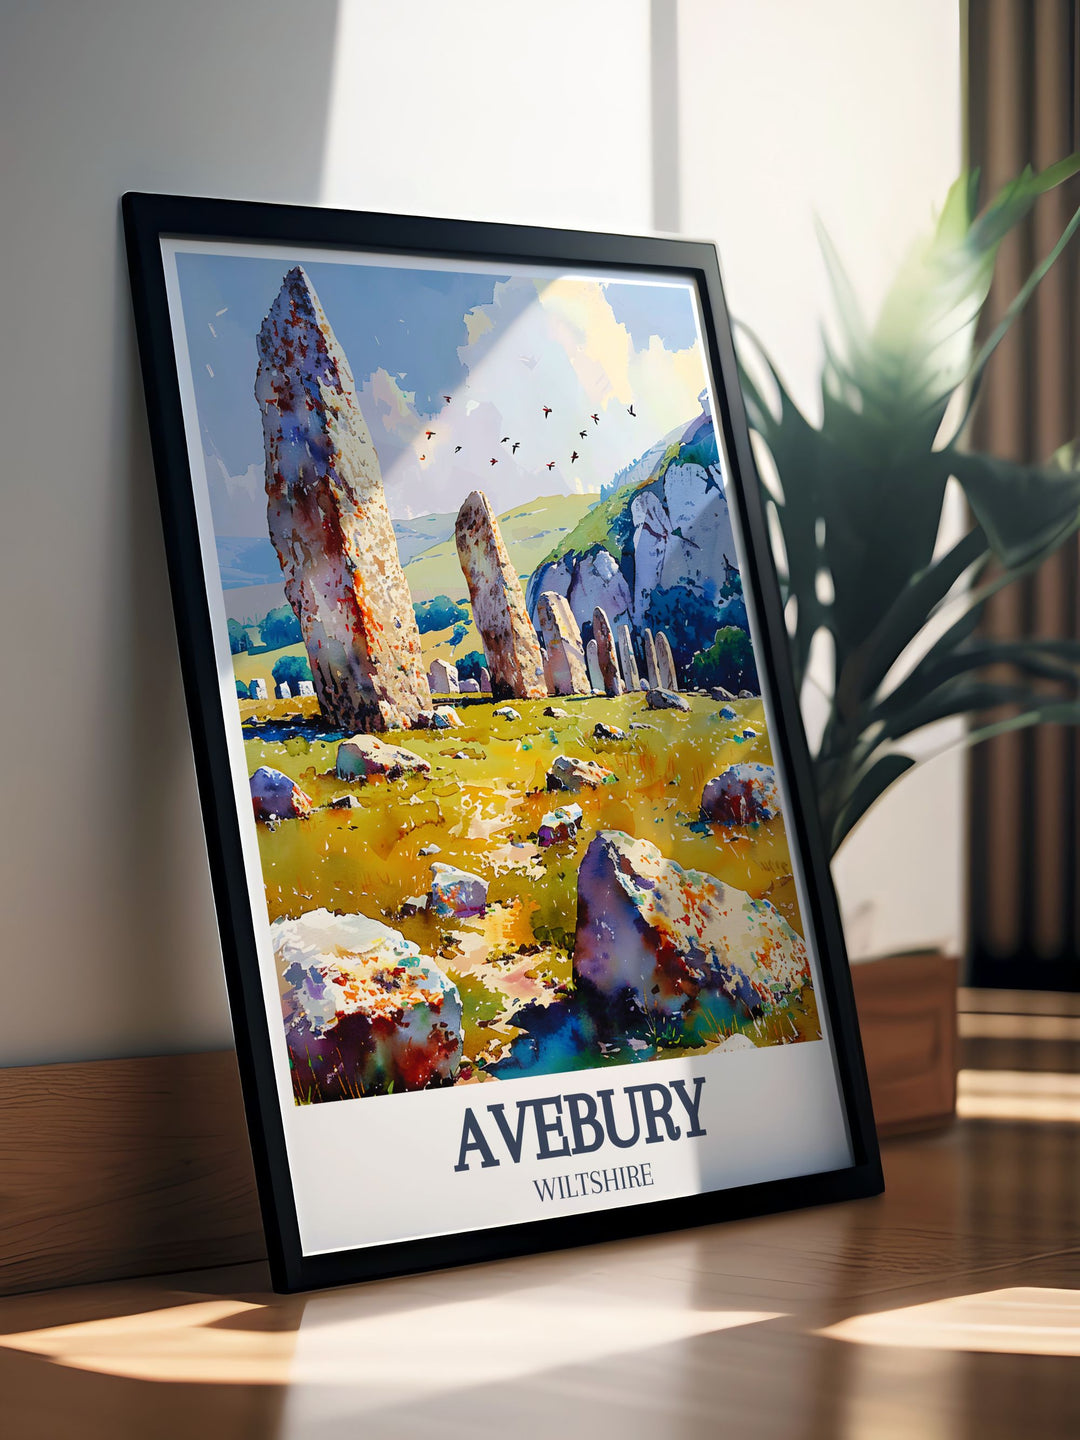 Highlighting the natural beauty of the North Wessex Downs, this travel poster features lush rolling hills and historical landmarks, ideal for nature enthusiasts and home decor lovers.